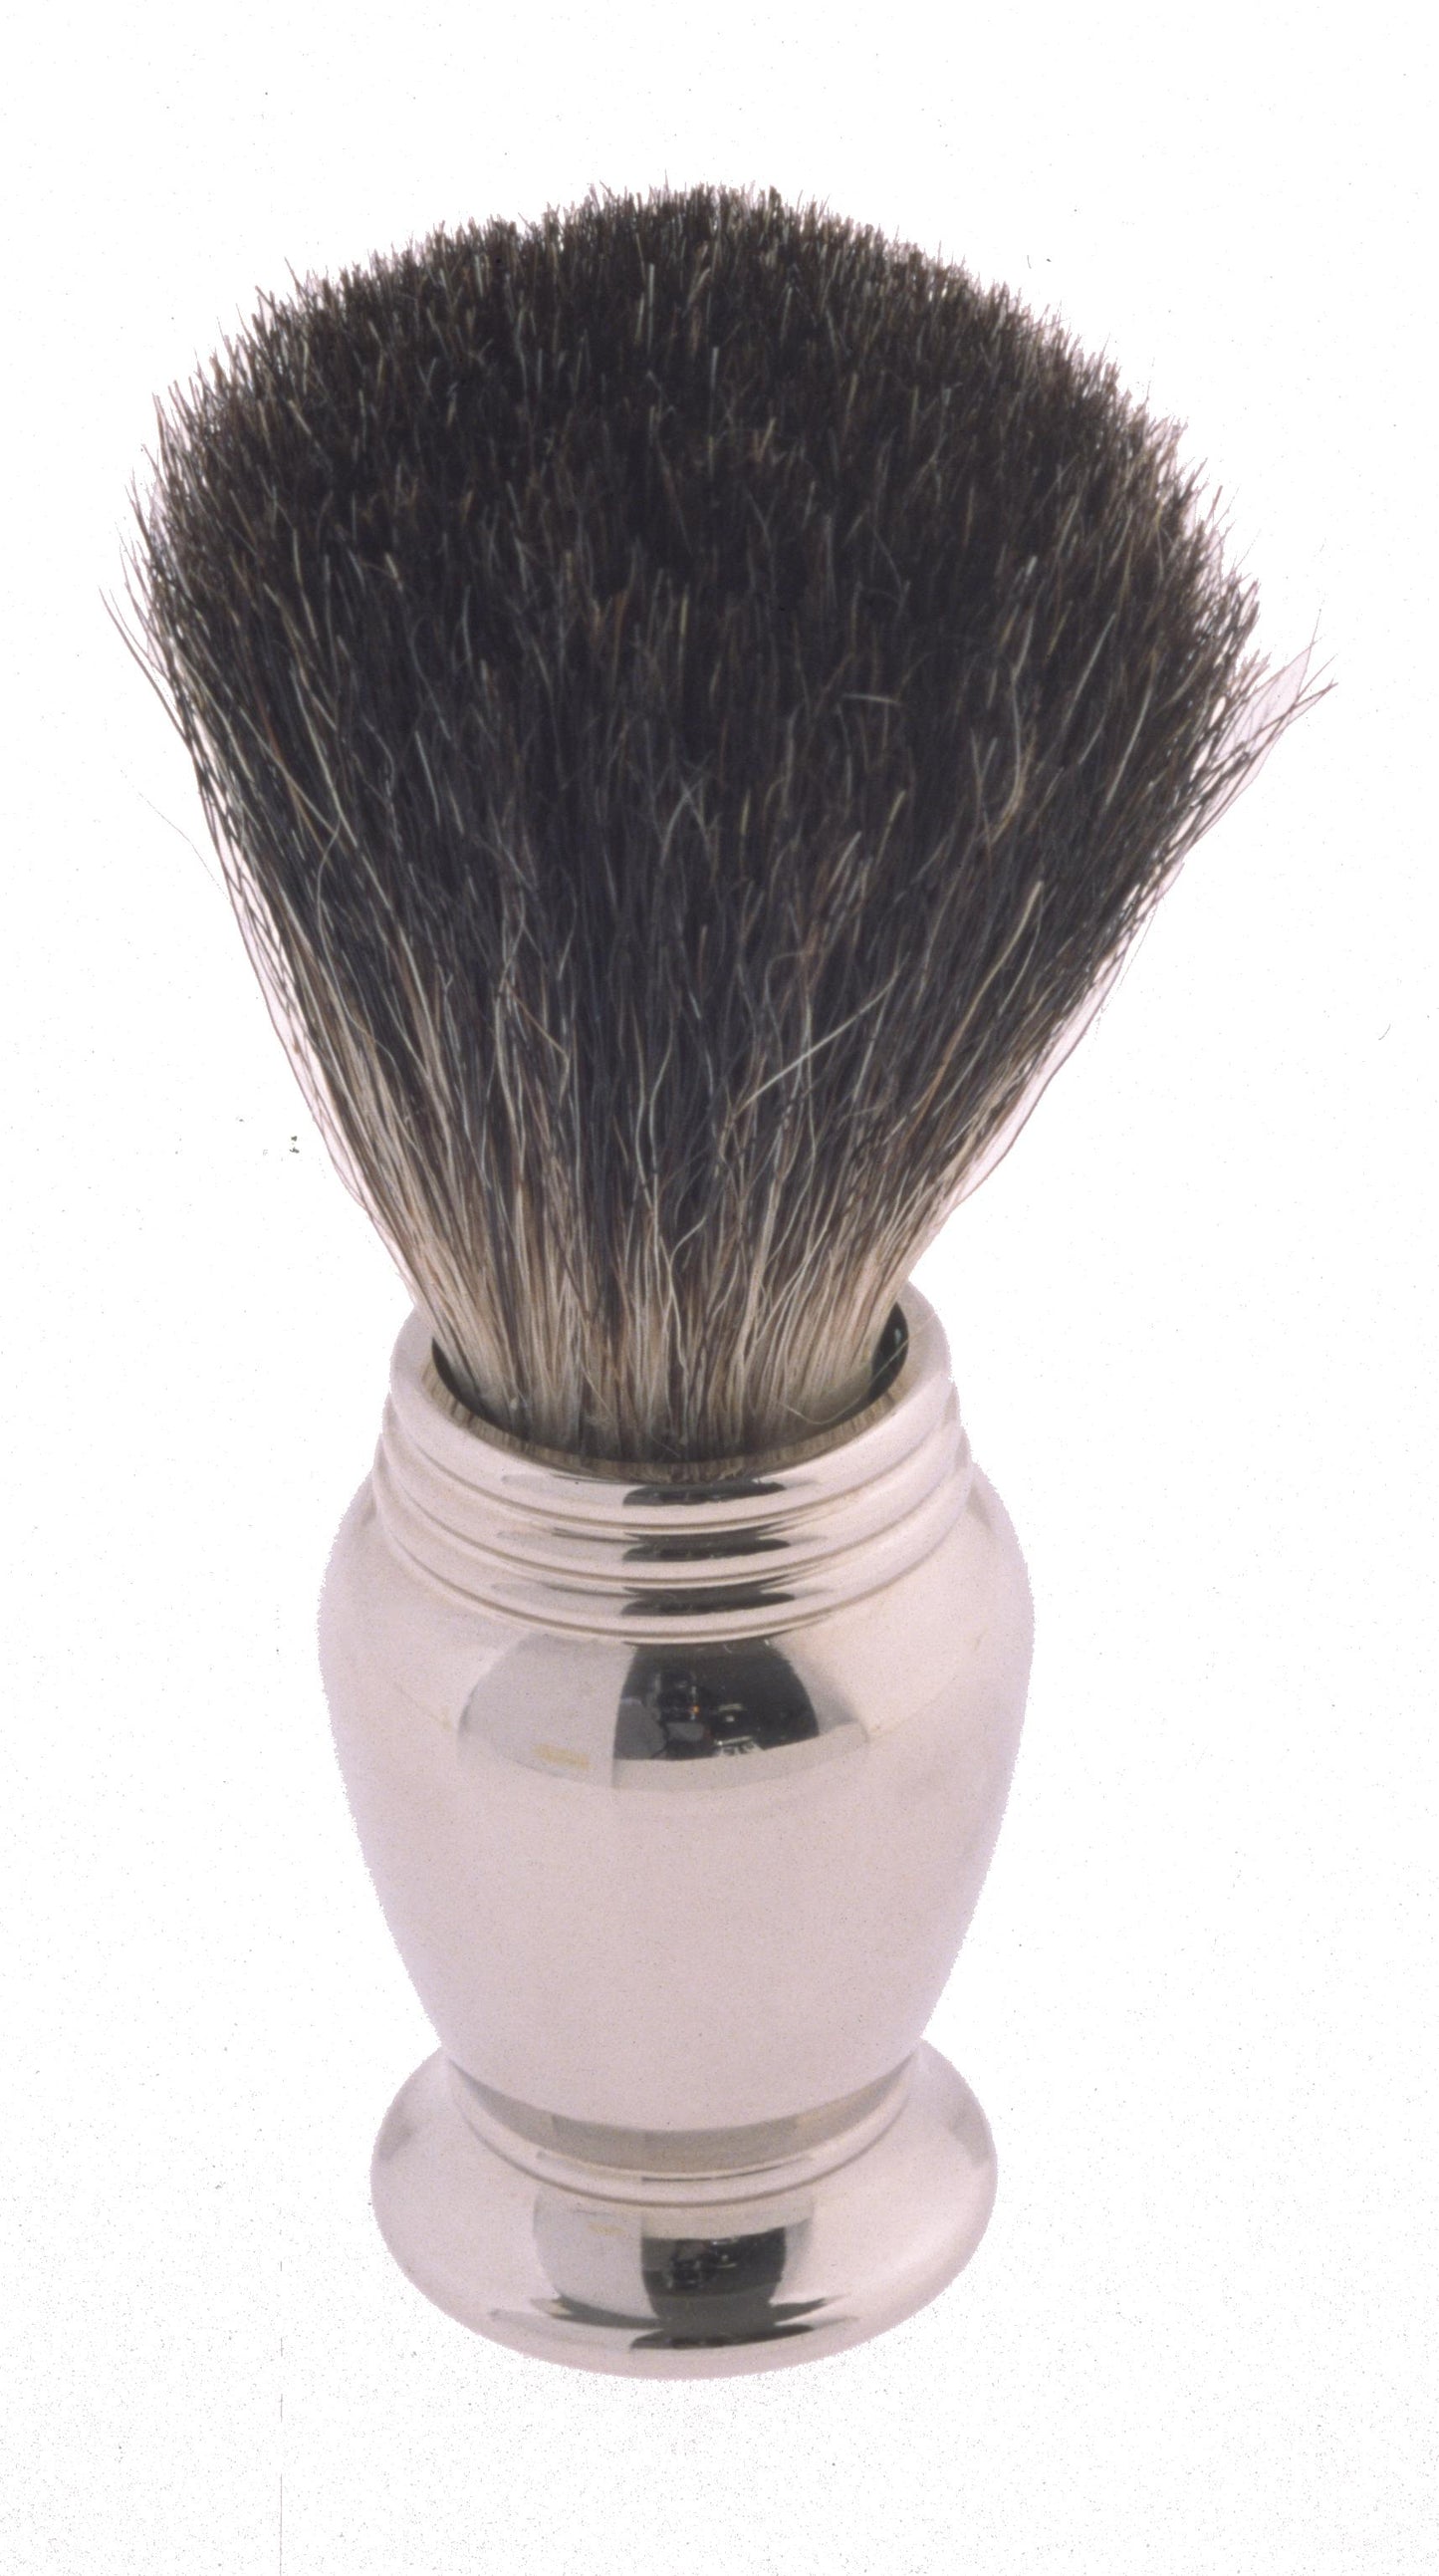 Col. Conk Chrome Handle Badger Hair Shave Brush